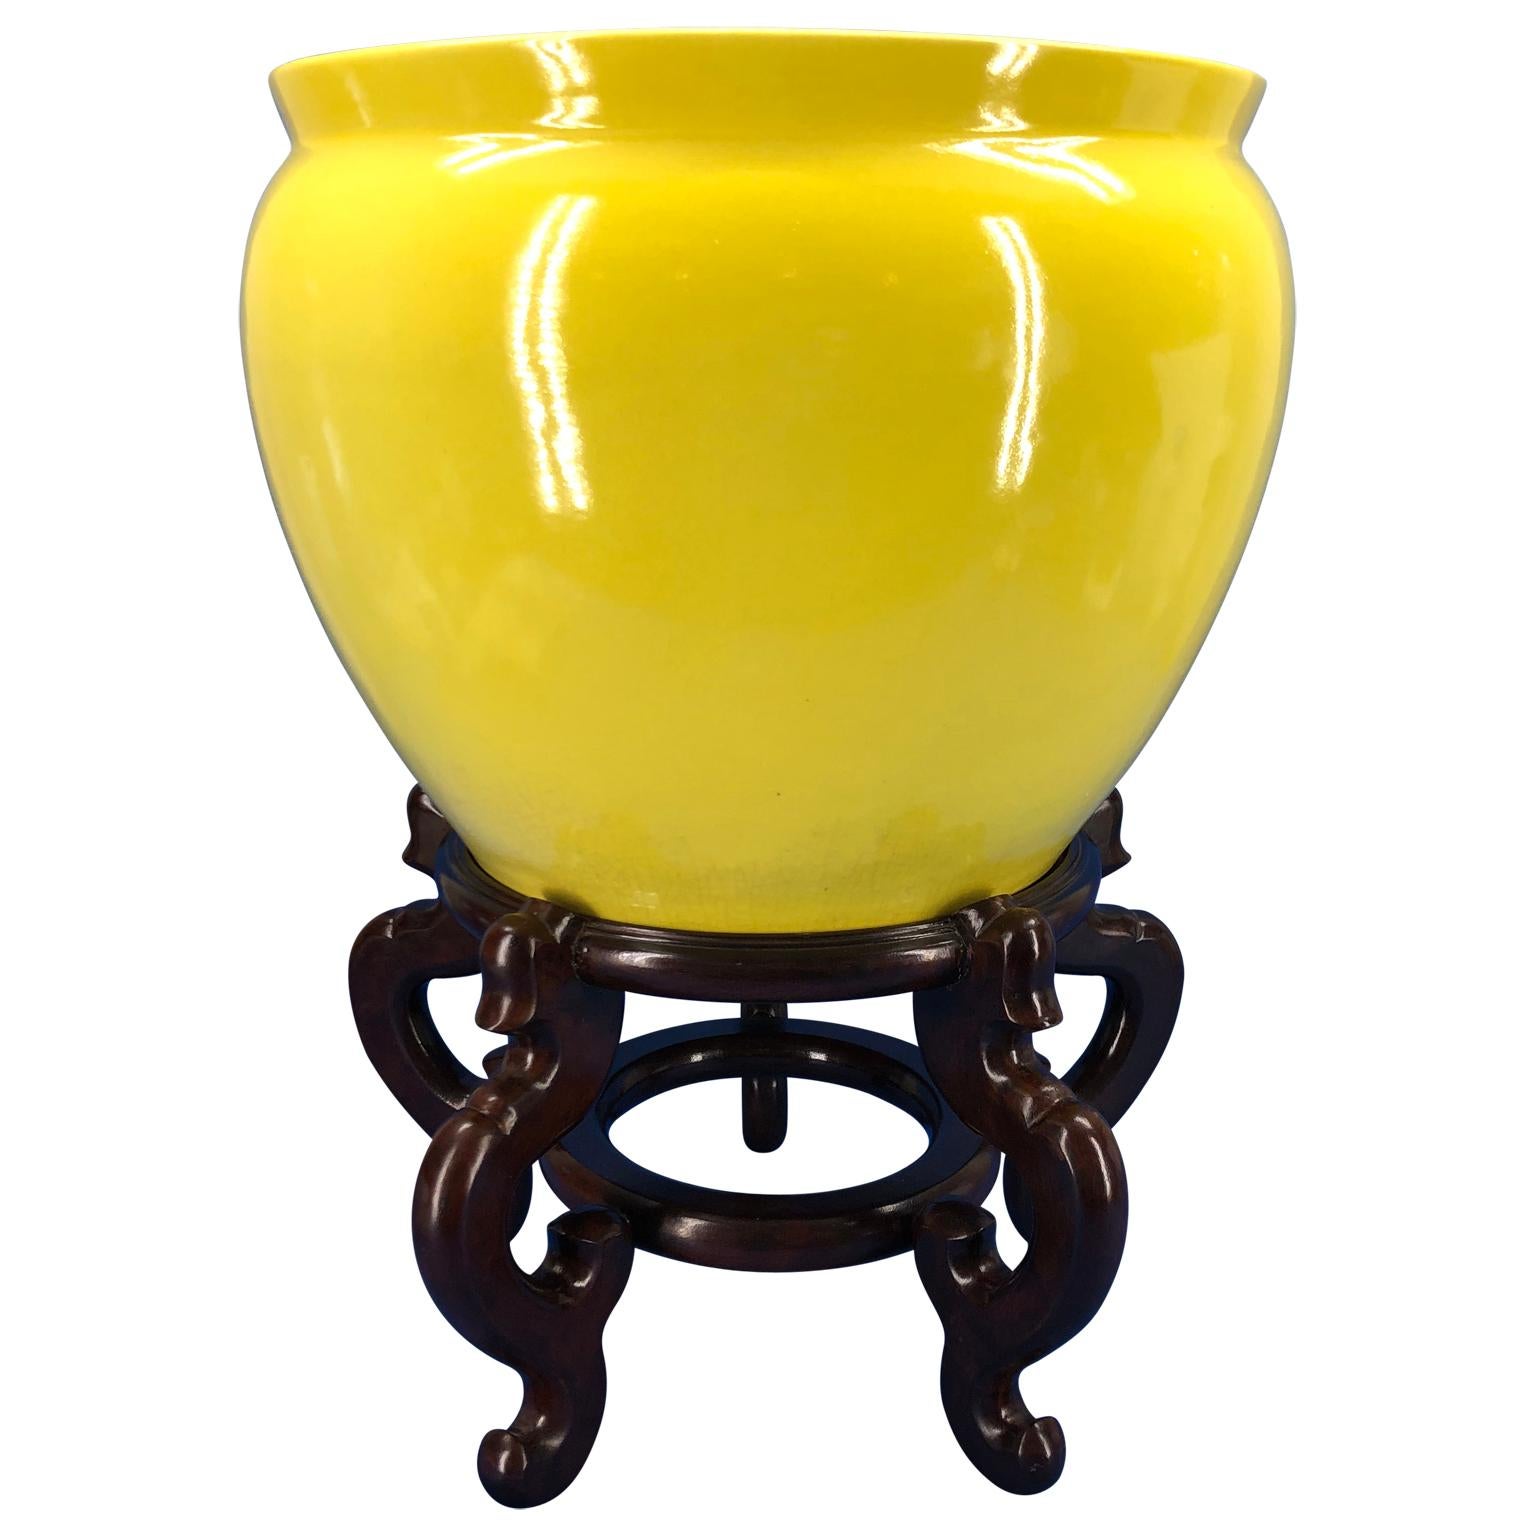 Large yellow hand painted porcelain jardinière bowl on a wooden stand.